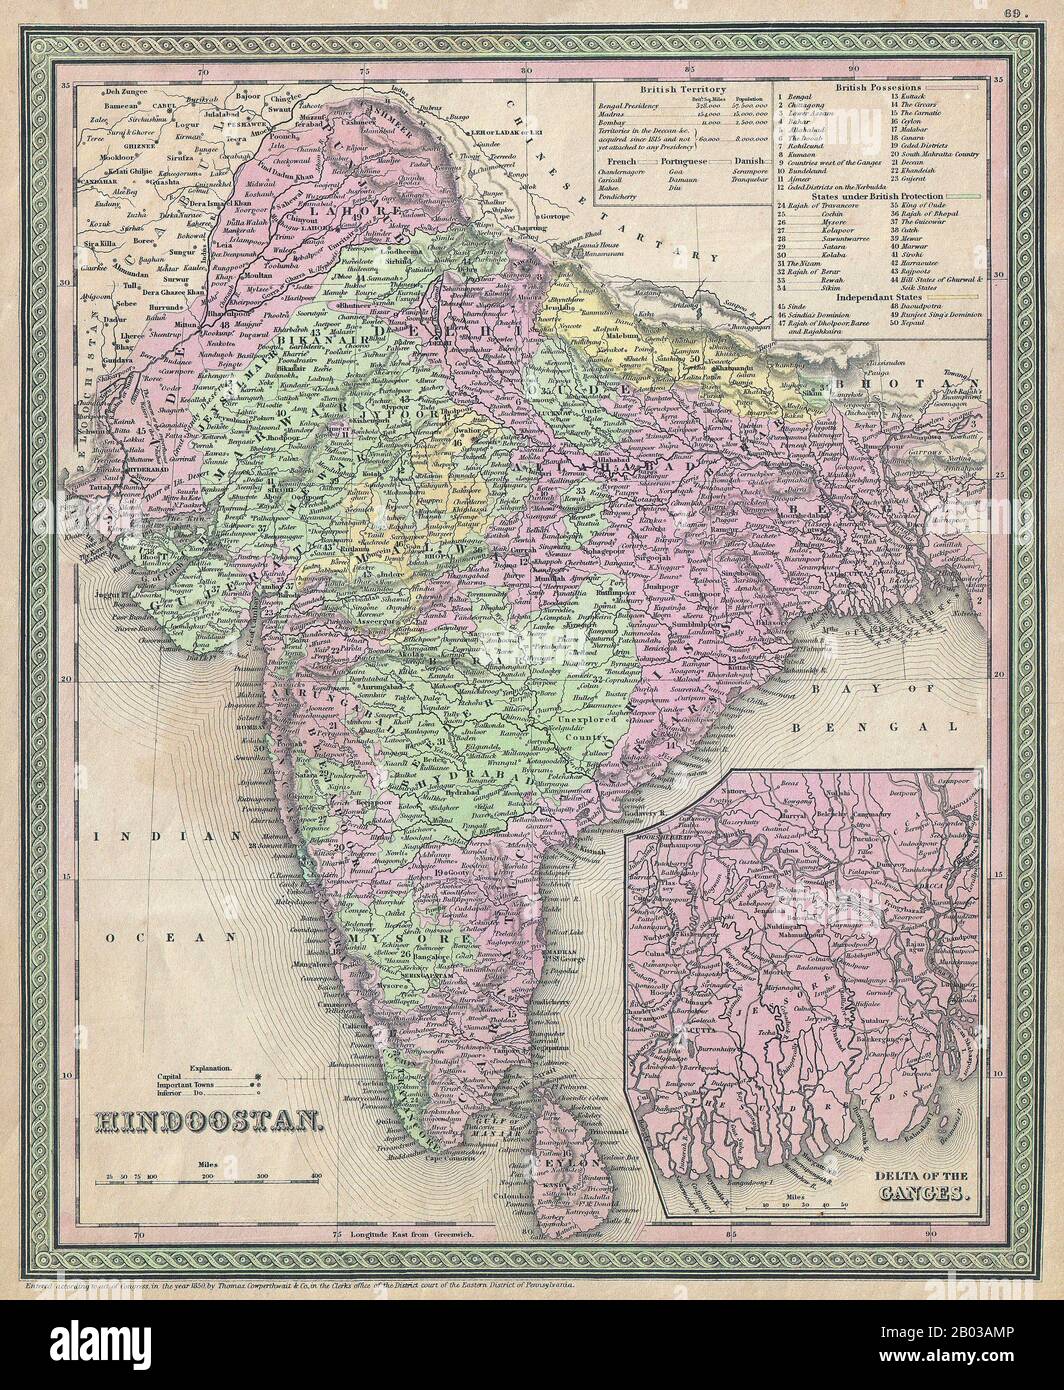 India: American map of the Indian subcontinent, with princely states and British possessions colour-coded, as well as a lower right inset detailing the Ganges River Delta. Lithographic engraving by Samuel Augustus Mitchell (1790-1868), 1850. Samuel Augustus Mitchell (1790-1868) was an American geographer born in Connecticut. Stock Photo